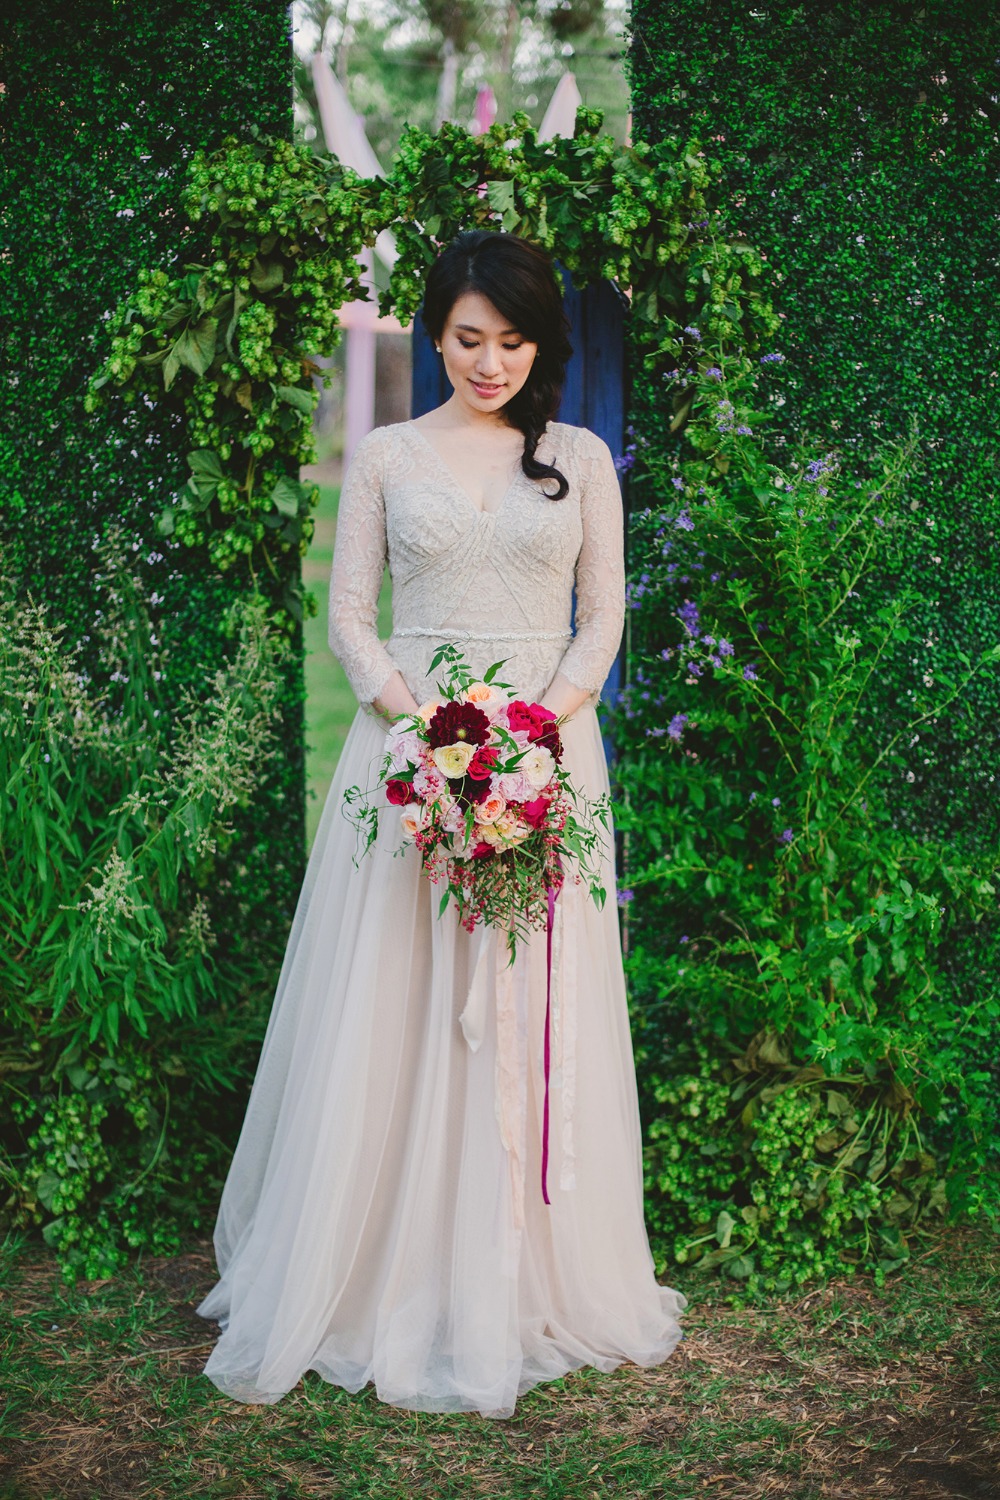 Gorgeous gown and bouquet